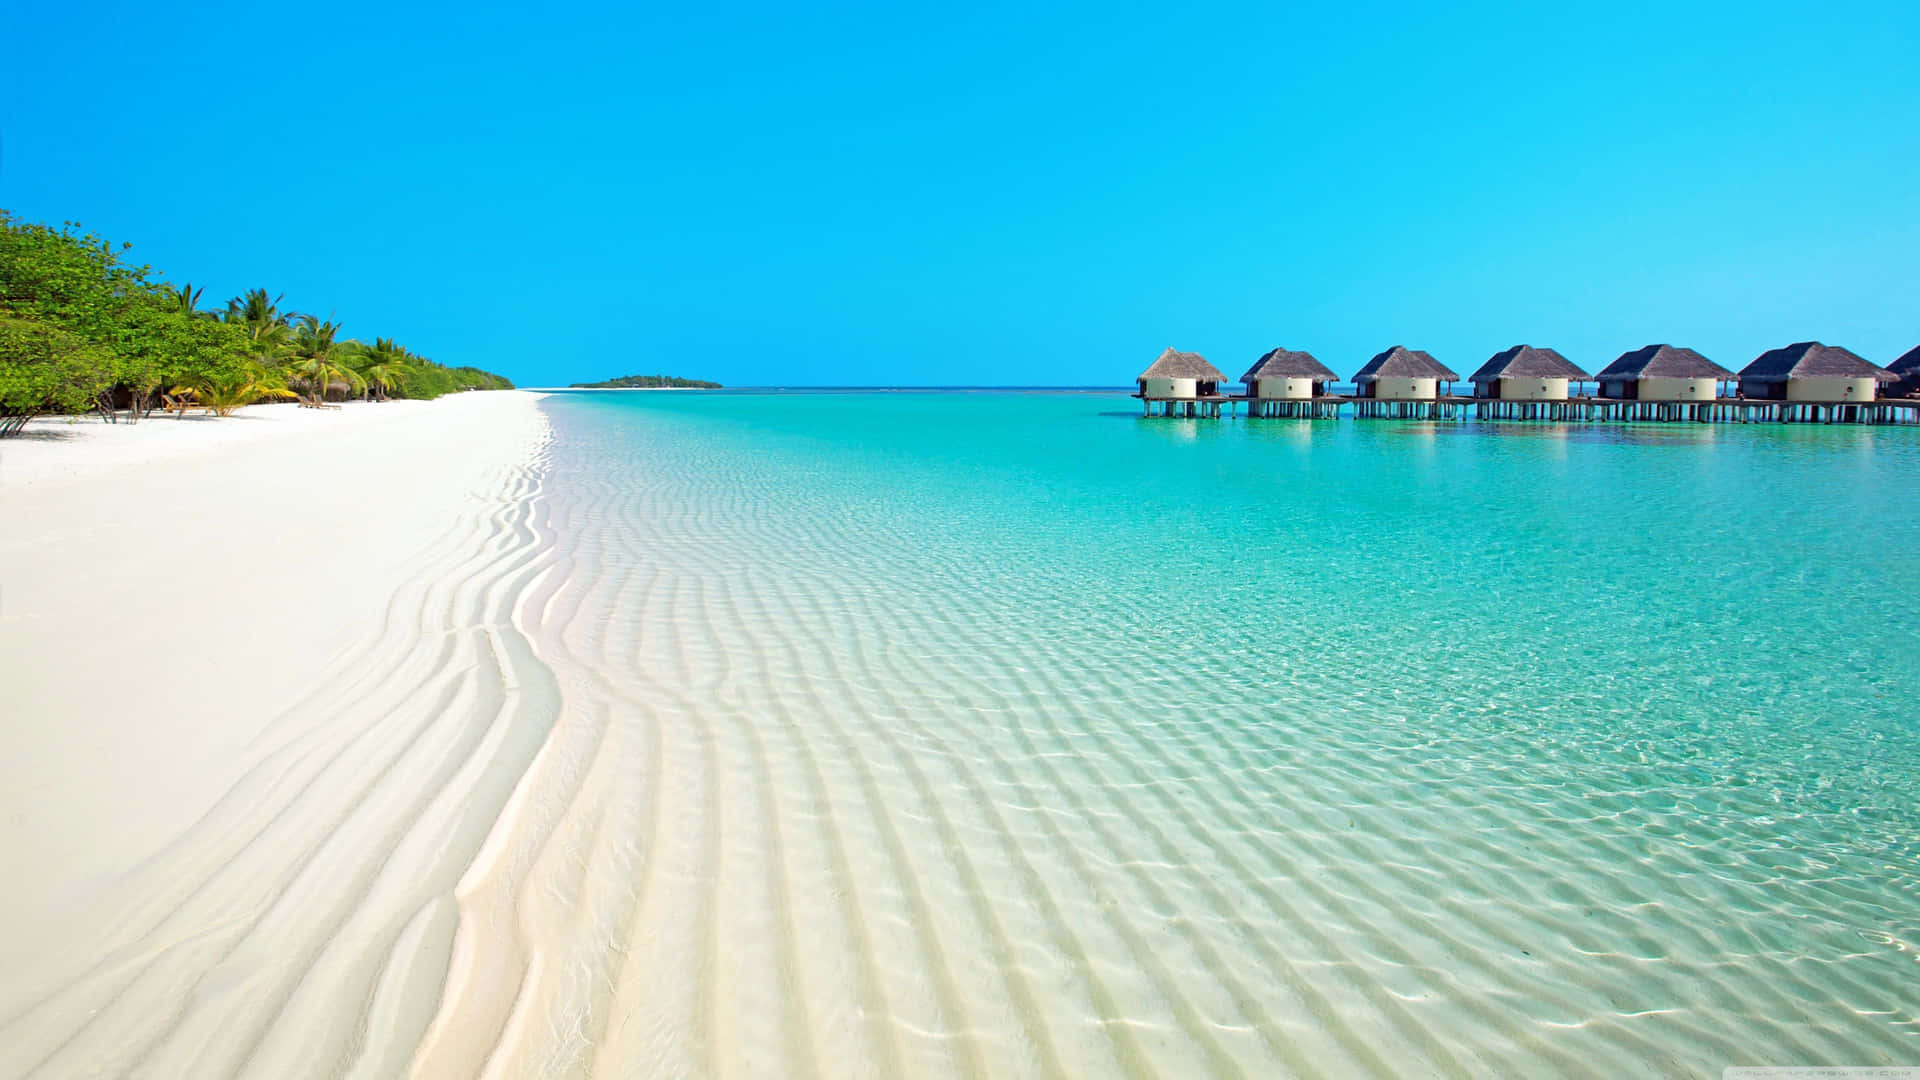 A White Sandy Beach With Huts And A Blue Ocean Wallpaper